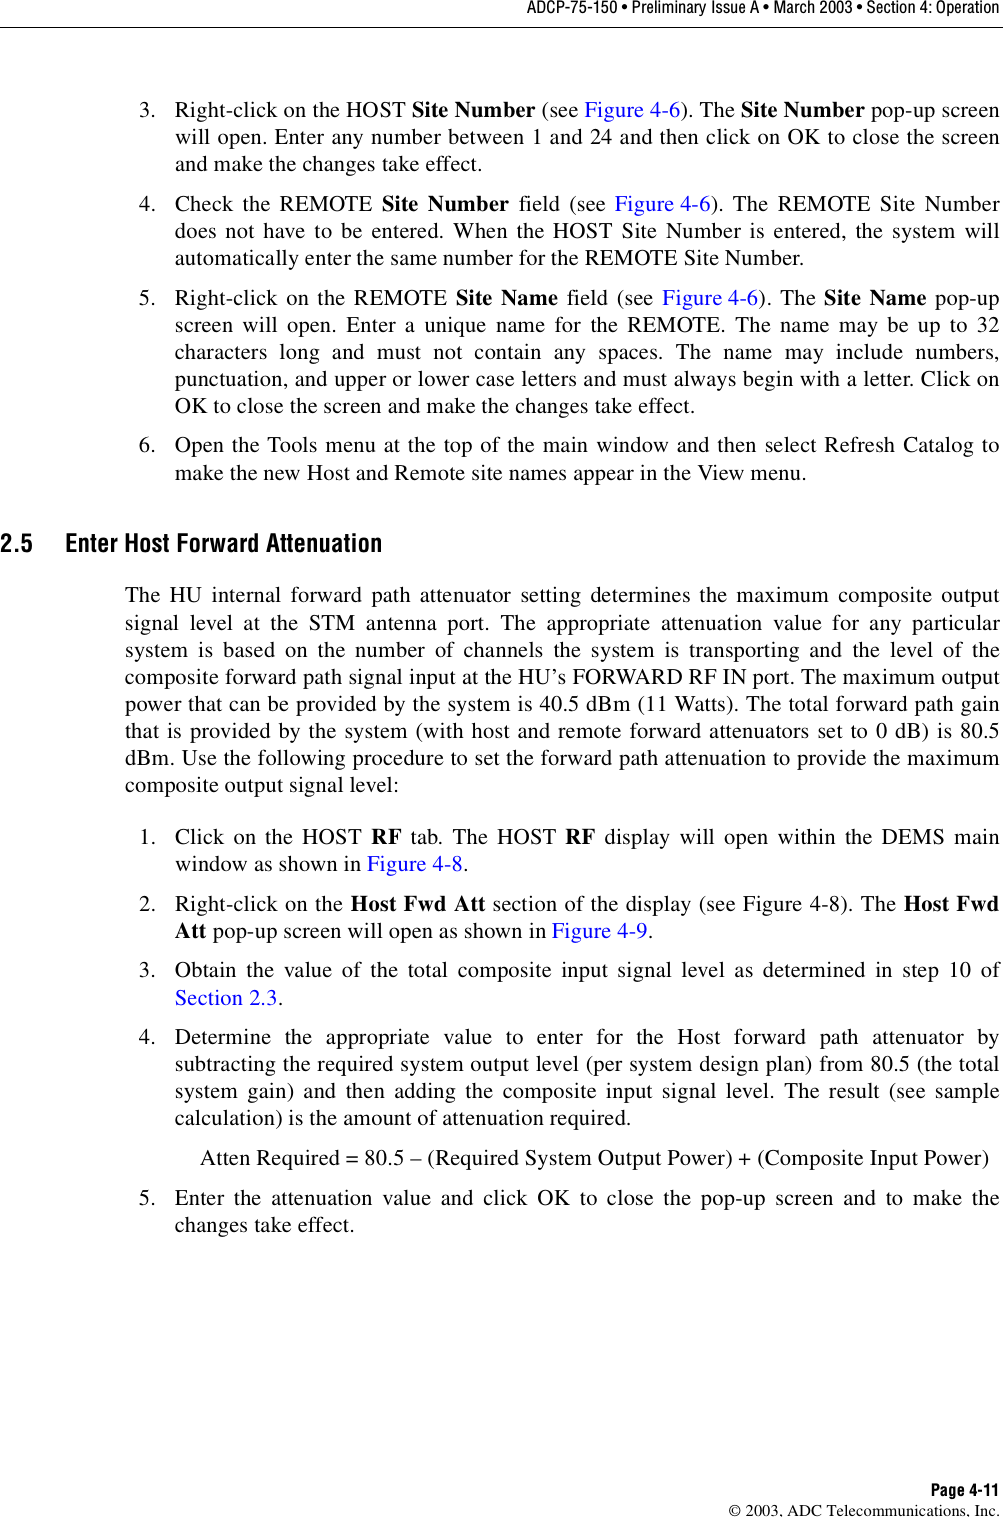 ADCP-75-150 • Preliminary Issue A • March 2003 • Section 4: OperationPage 4-11©2003, ADC Telecommunications, Inc.3. Right-click on the HOST Site Number (see Figure 4-6). The Site Number pop-up screenwill open. Enter any number between 1and 24 and then click on OK to close the screenand make the changes take effect.4. Check the REMOTE Site Number field (see Figure 4-6). The REMOTE Site Numberdoes not have to be entered. When the HOST Site Number is entered, the system willautomatically enter the same number for the REMOTE Site Number.5. Right-click on the REMOTE Site Name field (see Figure 4-6). The Site Name pop-upscreen will open. Enter aunique name for the REMOTE. The name may be up to 32characters long and must not contain any spaces. The name may include numbers,punctuation, and upper or lower case letters and must always begin with aletter. Click onOK to close the screen and make the changes take effect.6. Open the Tools menu at the top of the main window and then select Refresh Catalog tomake the new Host and Remote site names appear in the View menu.2.5 Enter Host Forward AttenuationThe HU internal forward path attenuator setting determines the maximum composite outputsignal level at the STM antenna port. The appropriate attenuation value for any particularsystem is based on the number of channels the system is transporting and the level of thecomposite forward path signal input at the HU’s FORWARD RF IN port. The maximum outputpower that can be provided by the system is 40.5 dBm (11 Watts). The total forward path gainthat is provided by the system (with host and remote forward attenuators set to 0dB) is 80.5dBm. Use the following procedure to set the forward path attenuation to provide the maximumcomposite output signal level:1. Click on the HOST RF tab. The HOST RF display will open within the DEMS mainwindow as shown in Figure 4-8.2. Right-click on the Host Fwd Att section of the display (see Figure 4-8). The Host FwdAtt pop-up screen will open as shown in Figure 4-9.3. Obtain the value of the total composite input signal level as determined in step 10 ofSection 2.3.4. Determine the appropriate value to enter for the Host forward path attenuator bysubtracting the required system output level (per system design plan) from 80.5 (the totalsystem gain) and then adding the composite input signal level. The result (see samplecalculation) is the amount of attenuation required.Atten Required =80.5 –(Required System Output Power) +(Composite Input Power)5. Enter the attenuation value and click OK to close the pop-up screen and to make thechanges take effect.